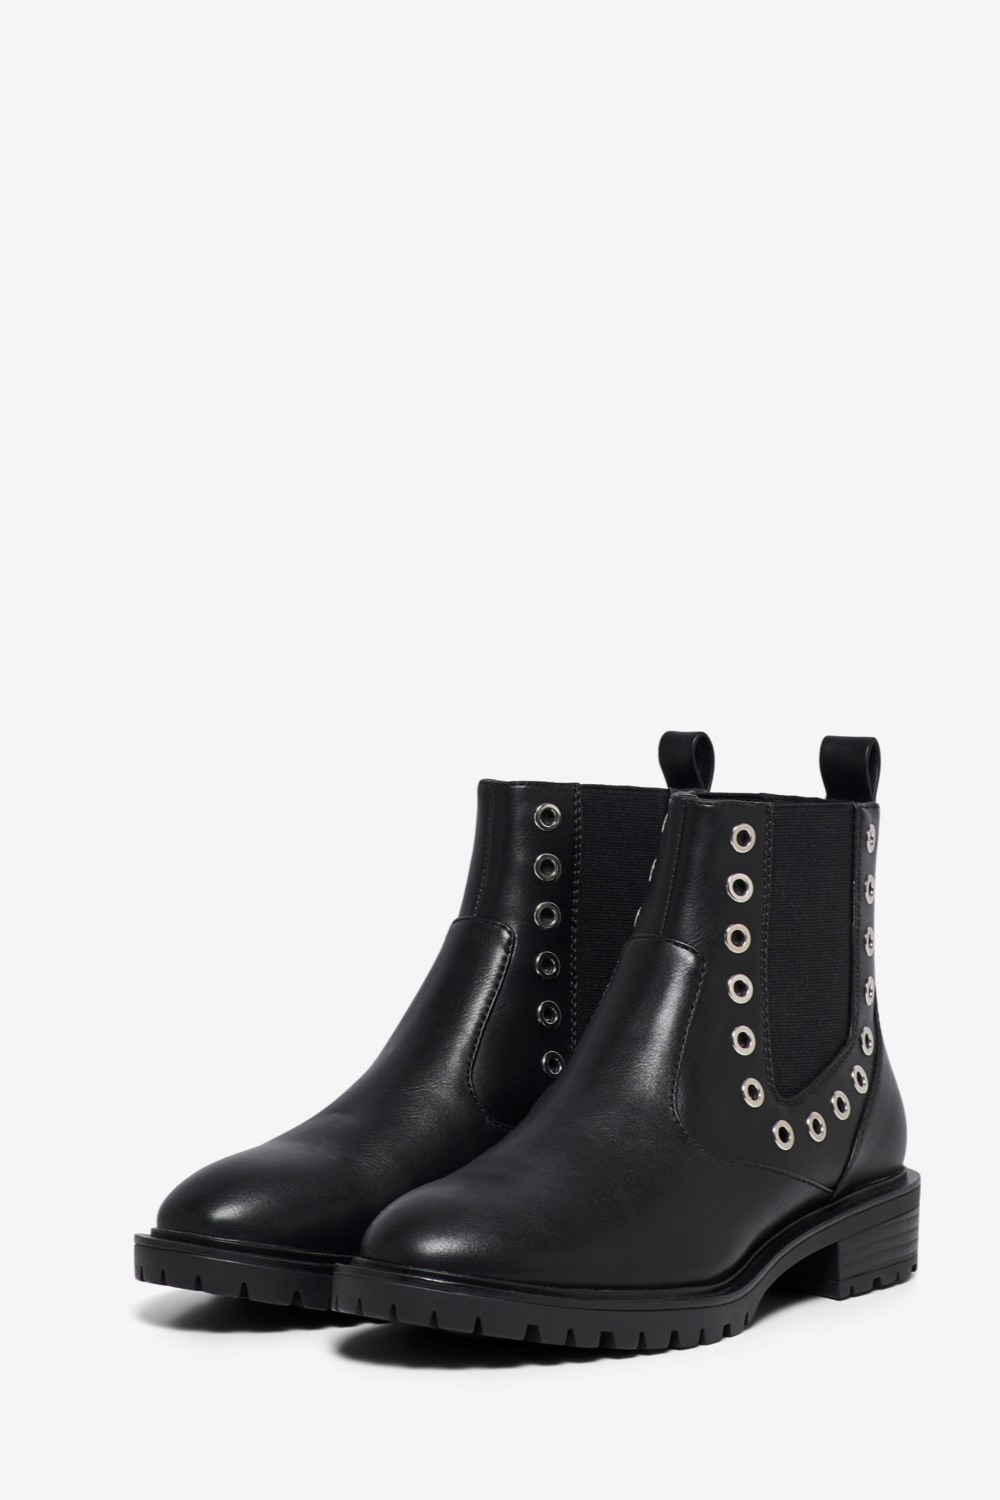 Only Tina Chelsea Boot in Black | iCLOTHING - iCLOTHING